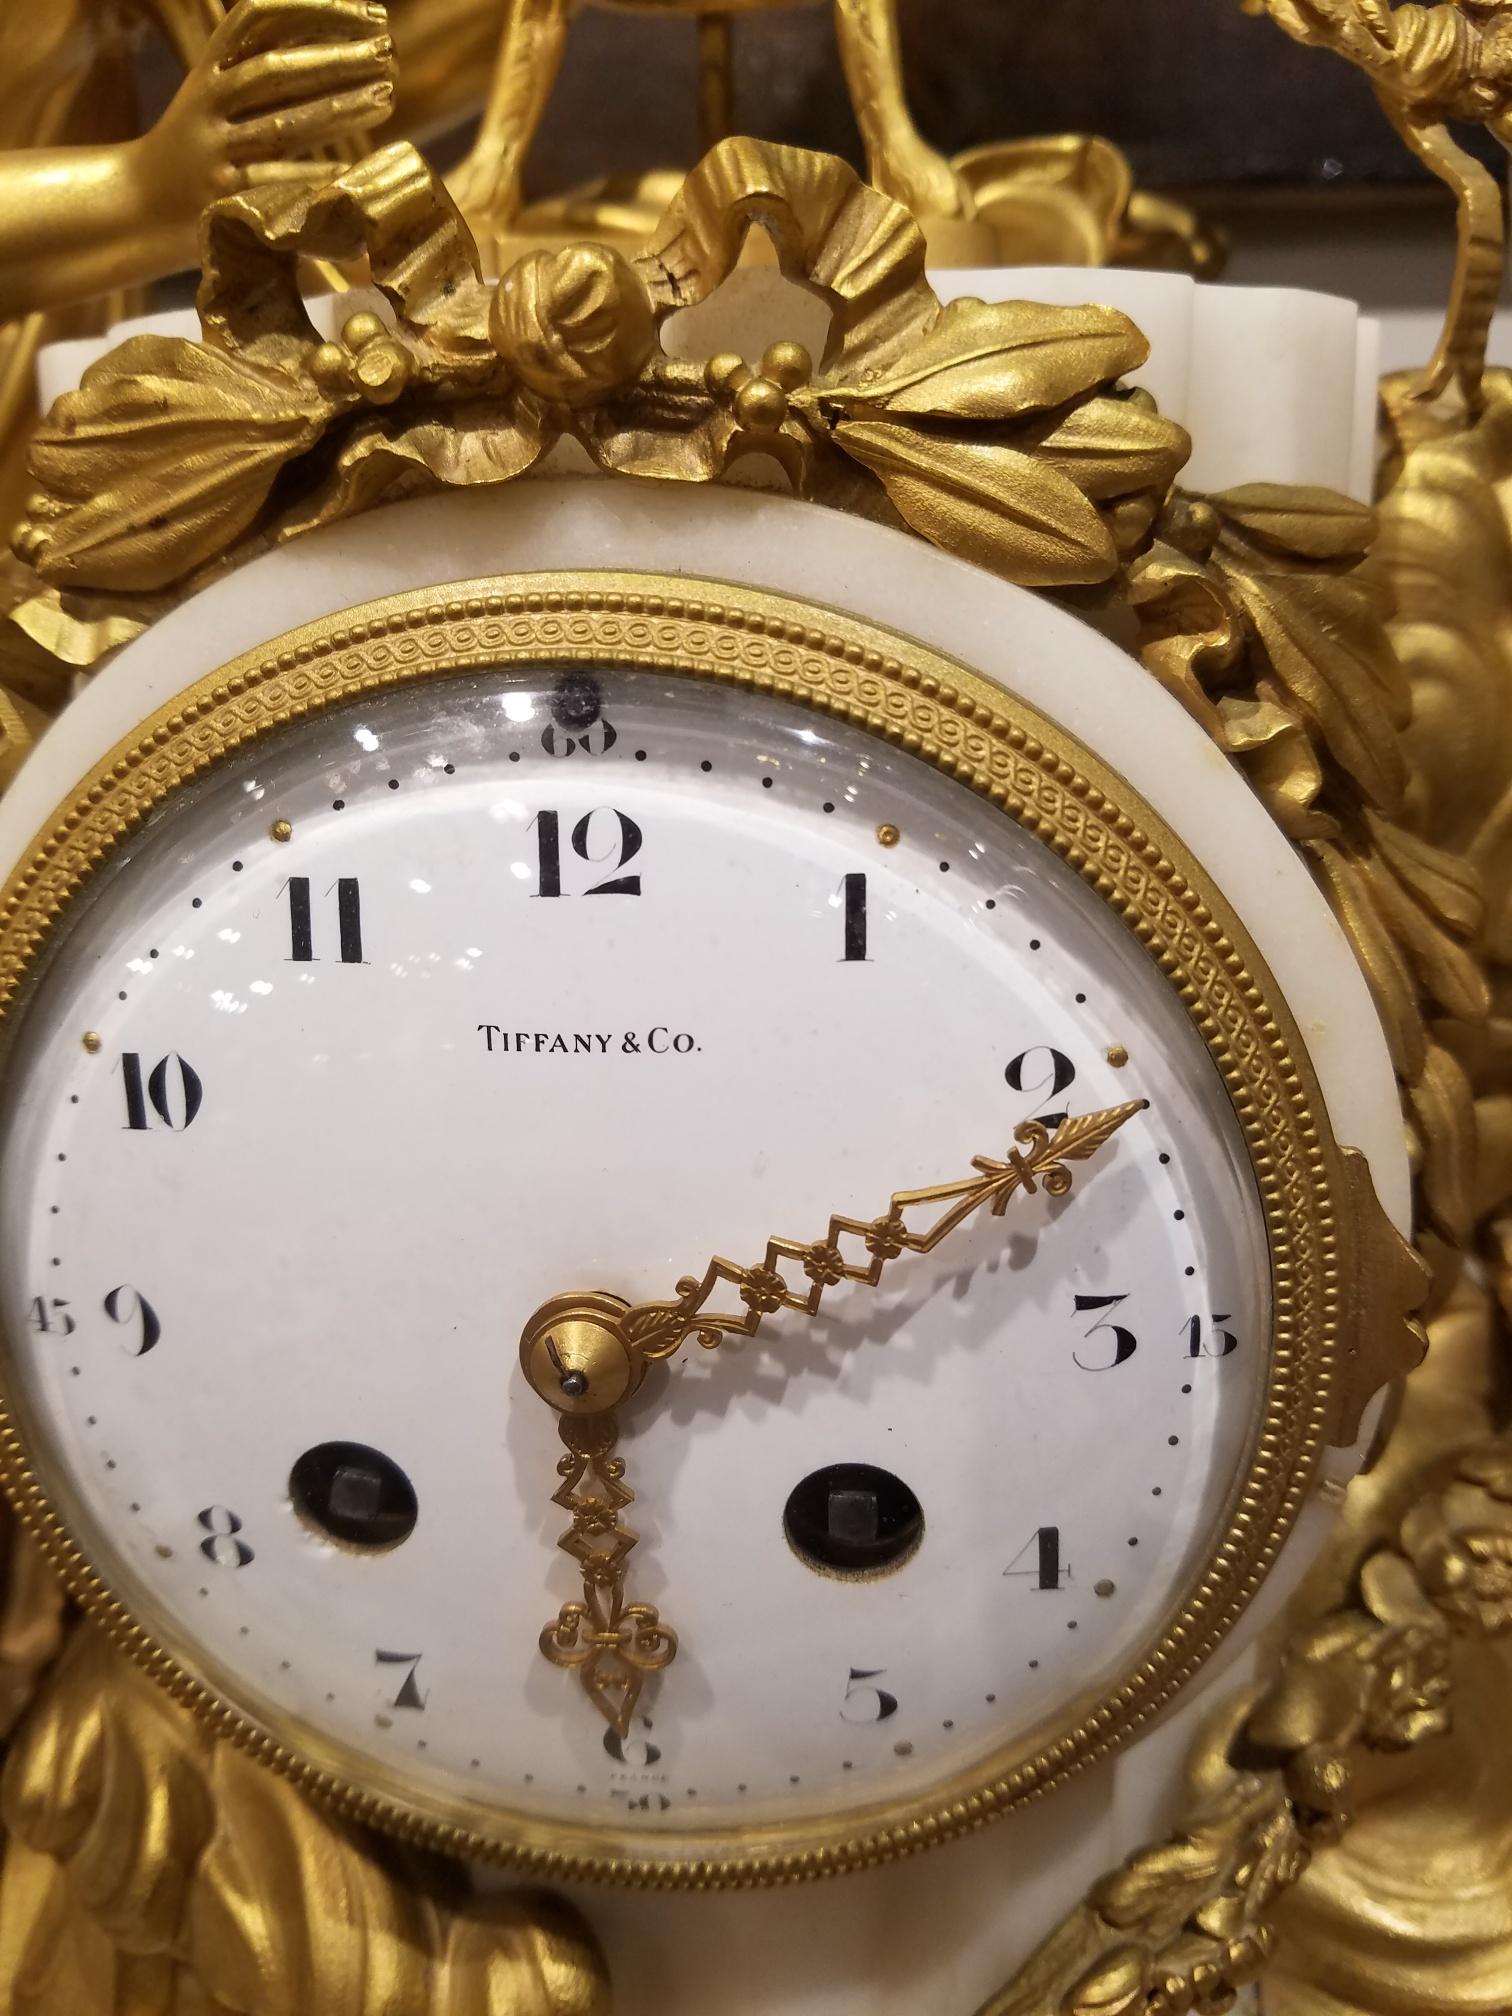 Louis XVI Beautiful and Fine 19th Century French Mantle Clock Signed Tiffany